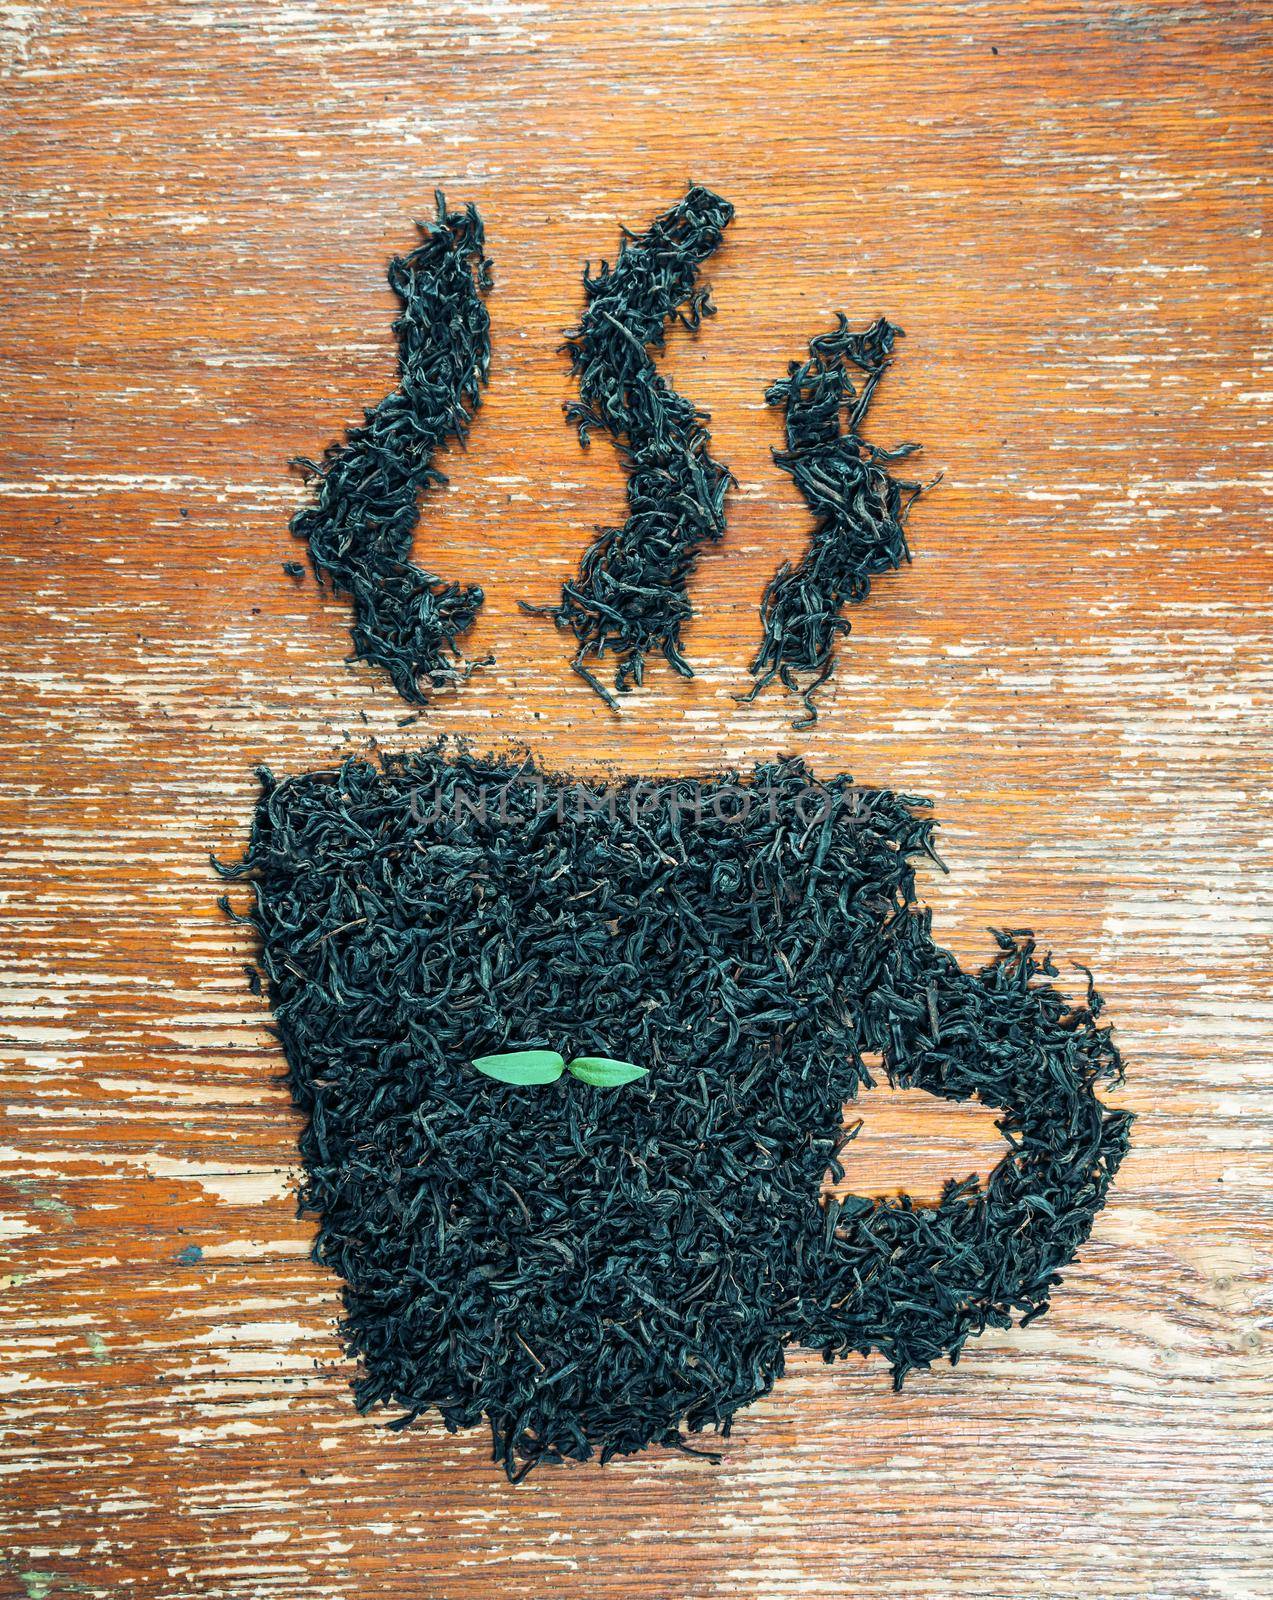 Black leaf tea in the shape of cup with green plant on a wooden table